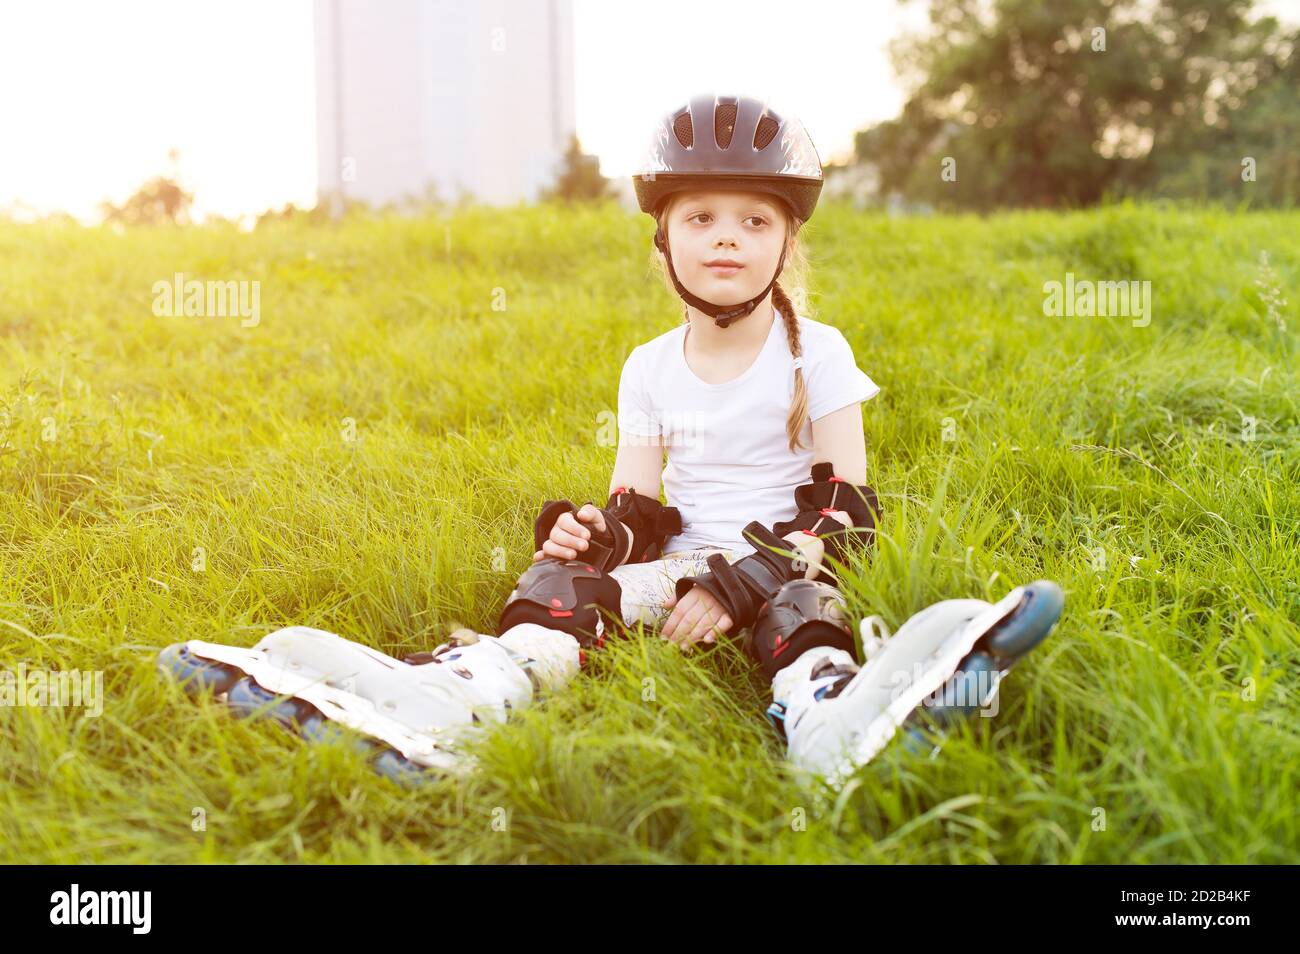 Pretty little girl learning to roller skate at the park Stock Photo